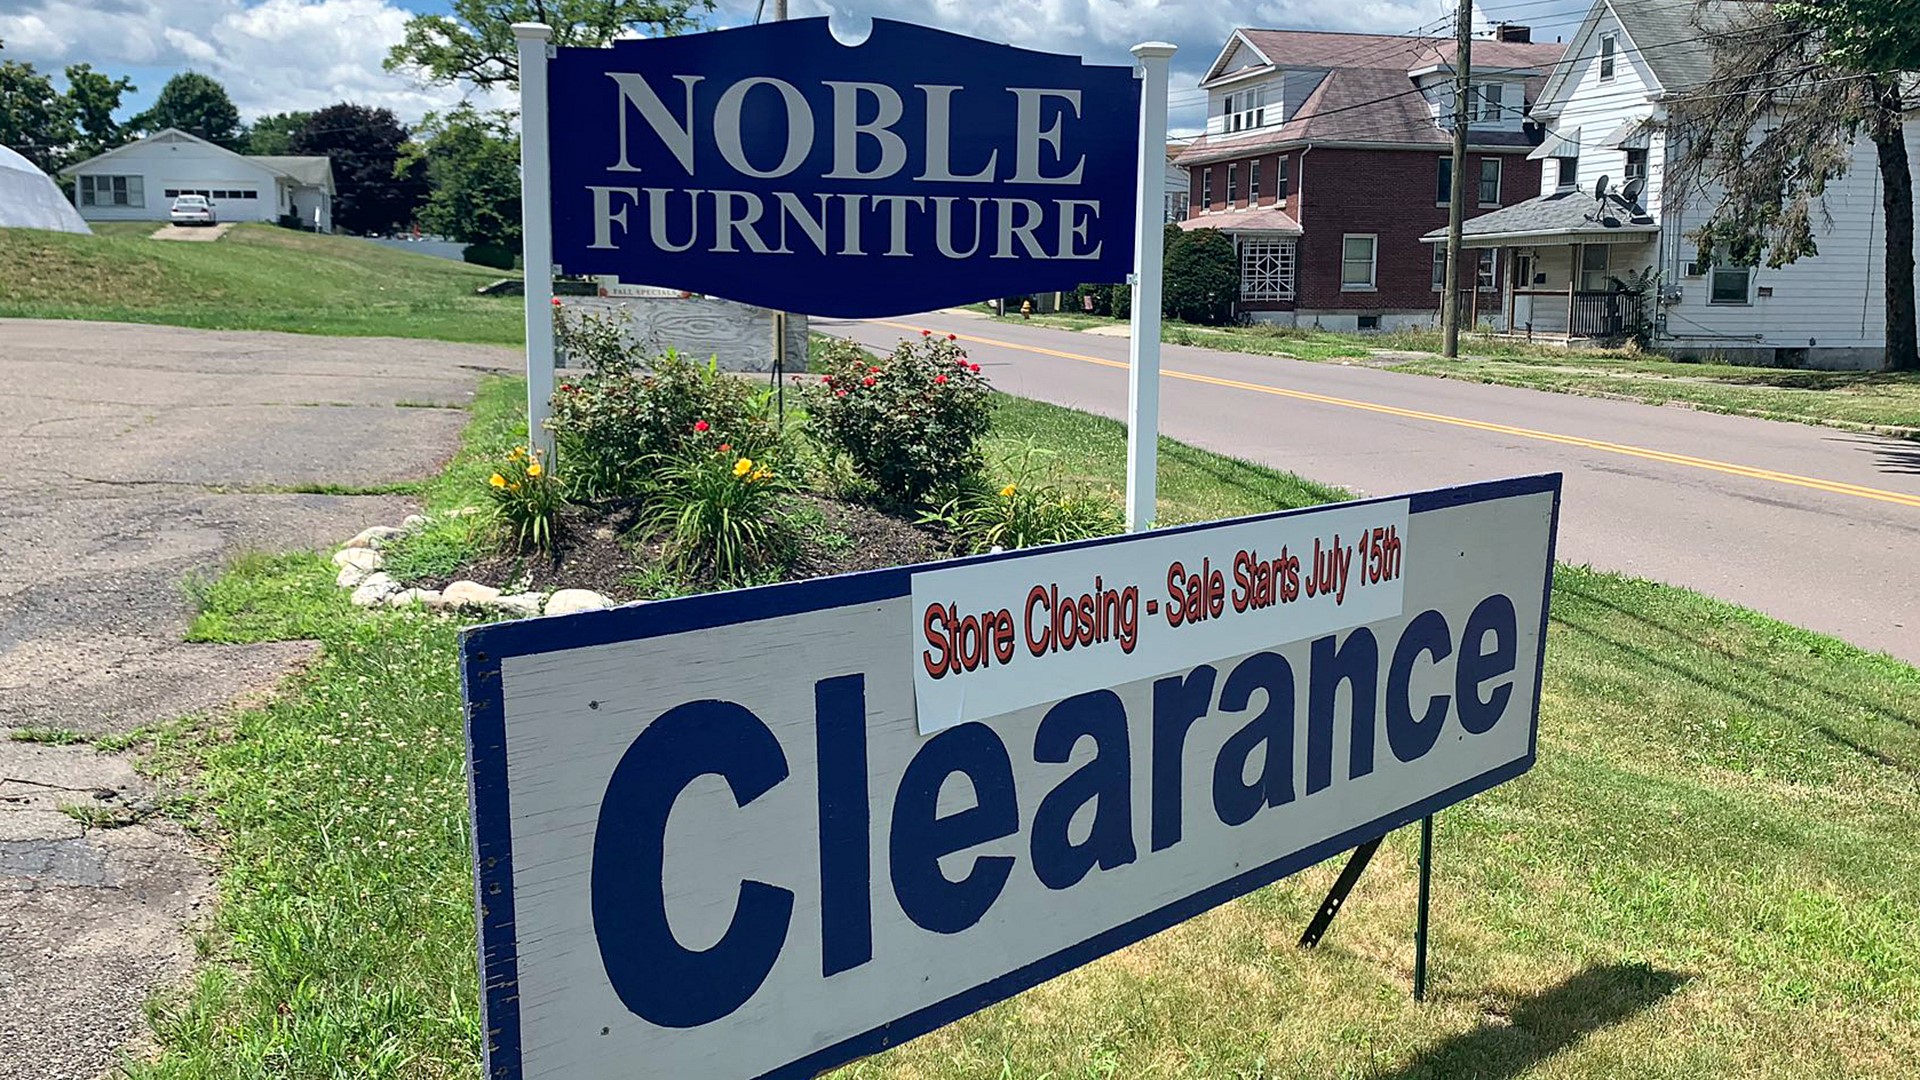 The long-standing furniture store will start is 'Going Out of Business Sale' on July 15th.